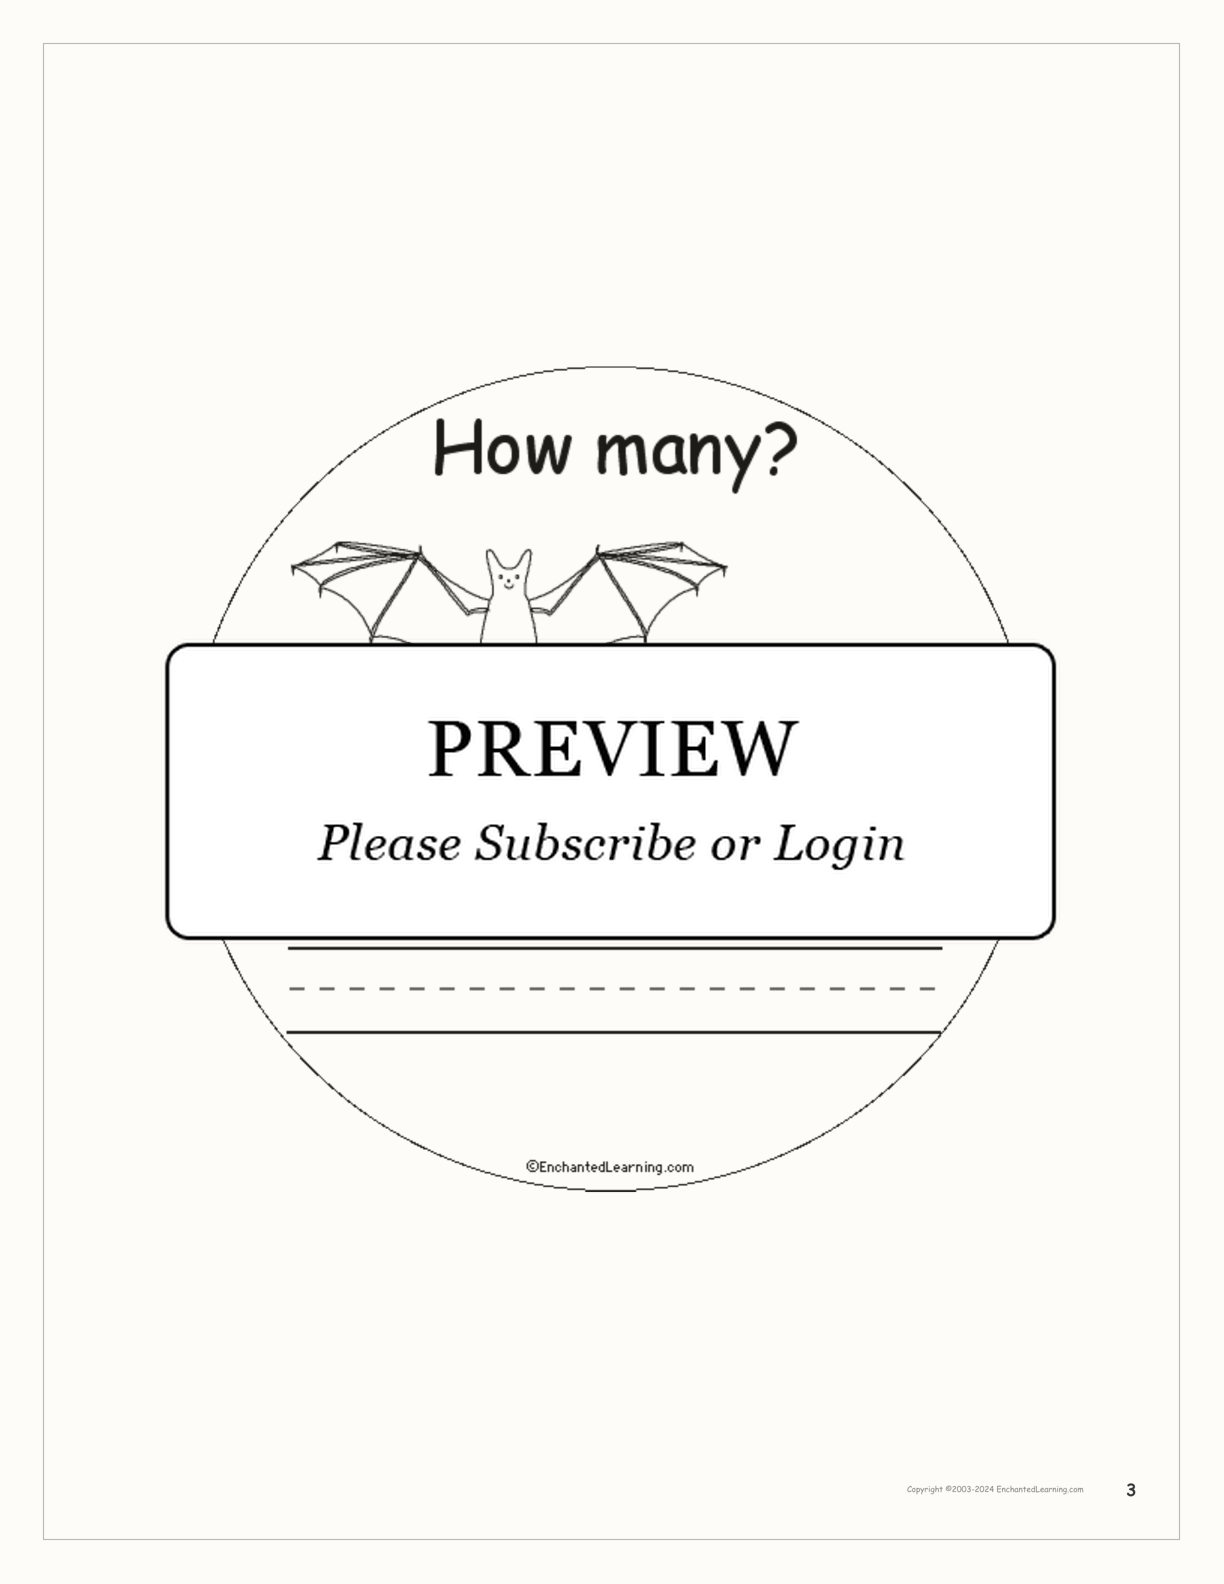 How Many Bats? Book for Early Readers interactive printout page 3